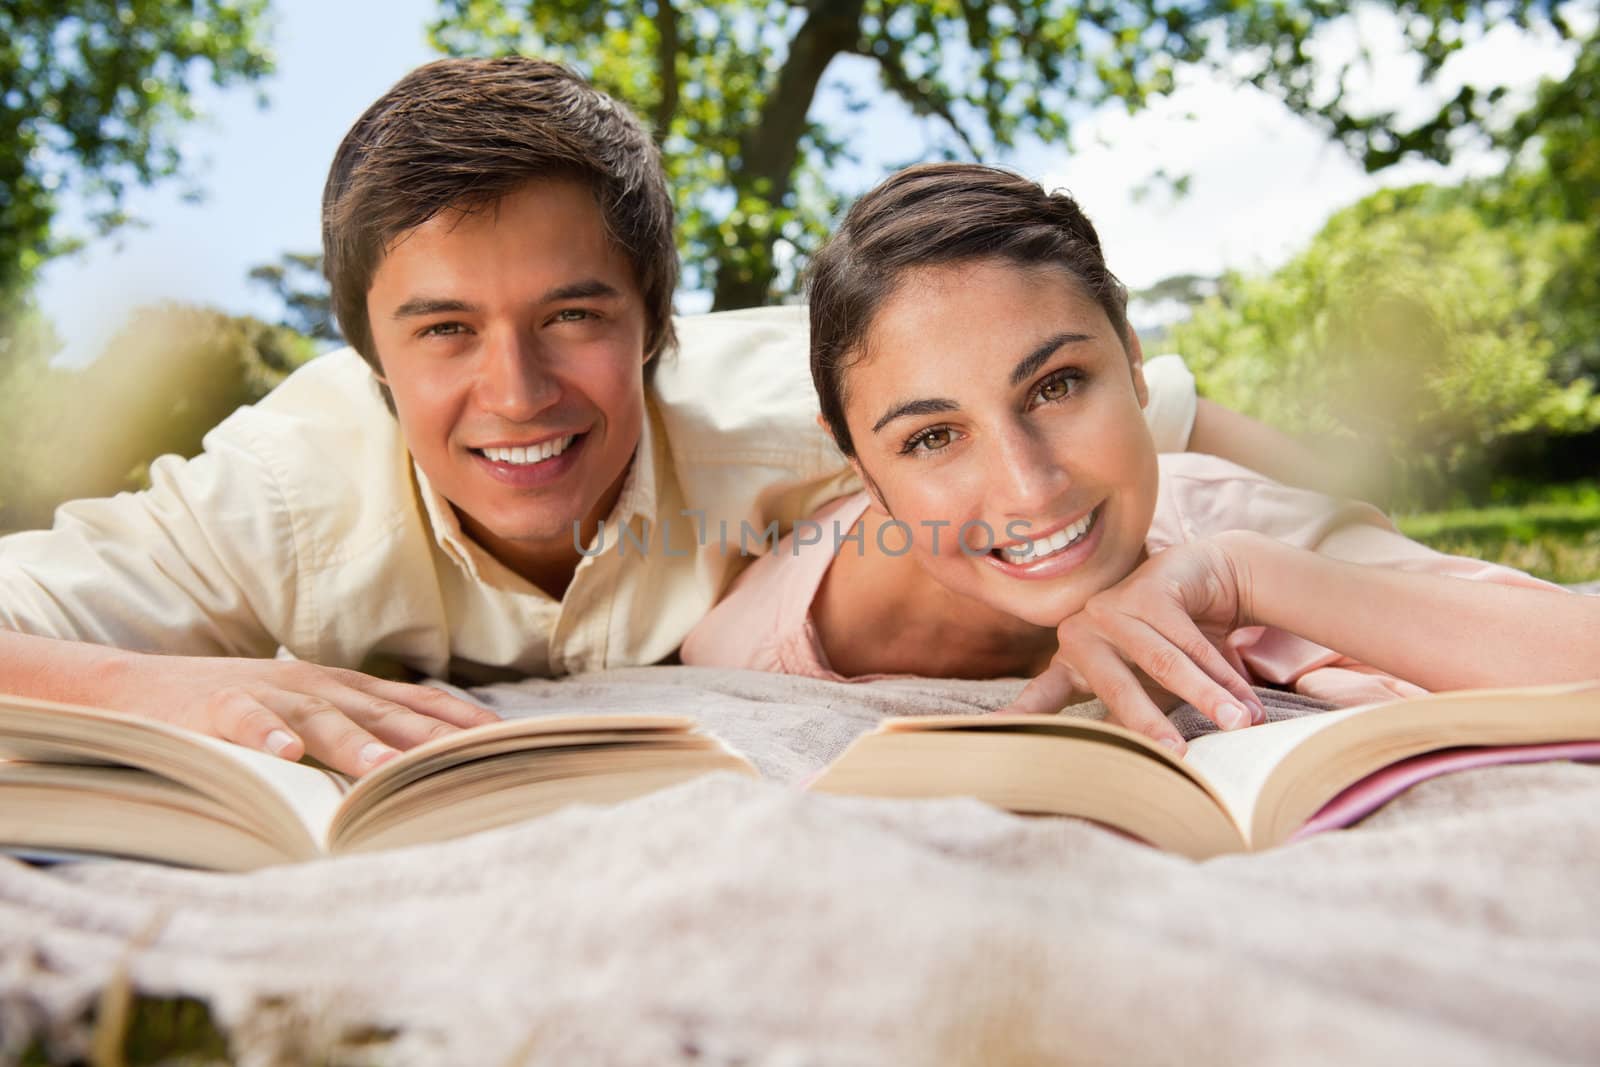 Man and woman reading books together while lying prone on a grey blanket in the grass